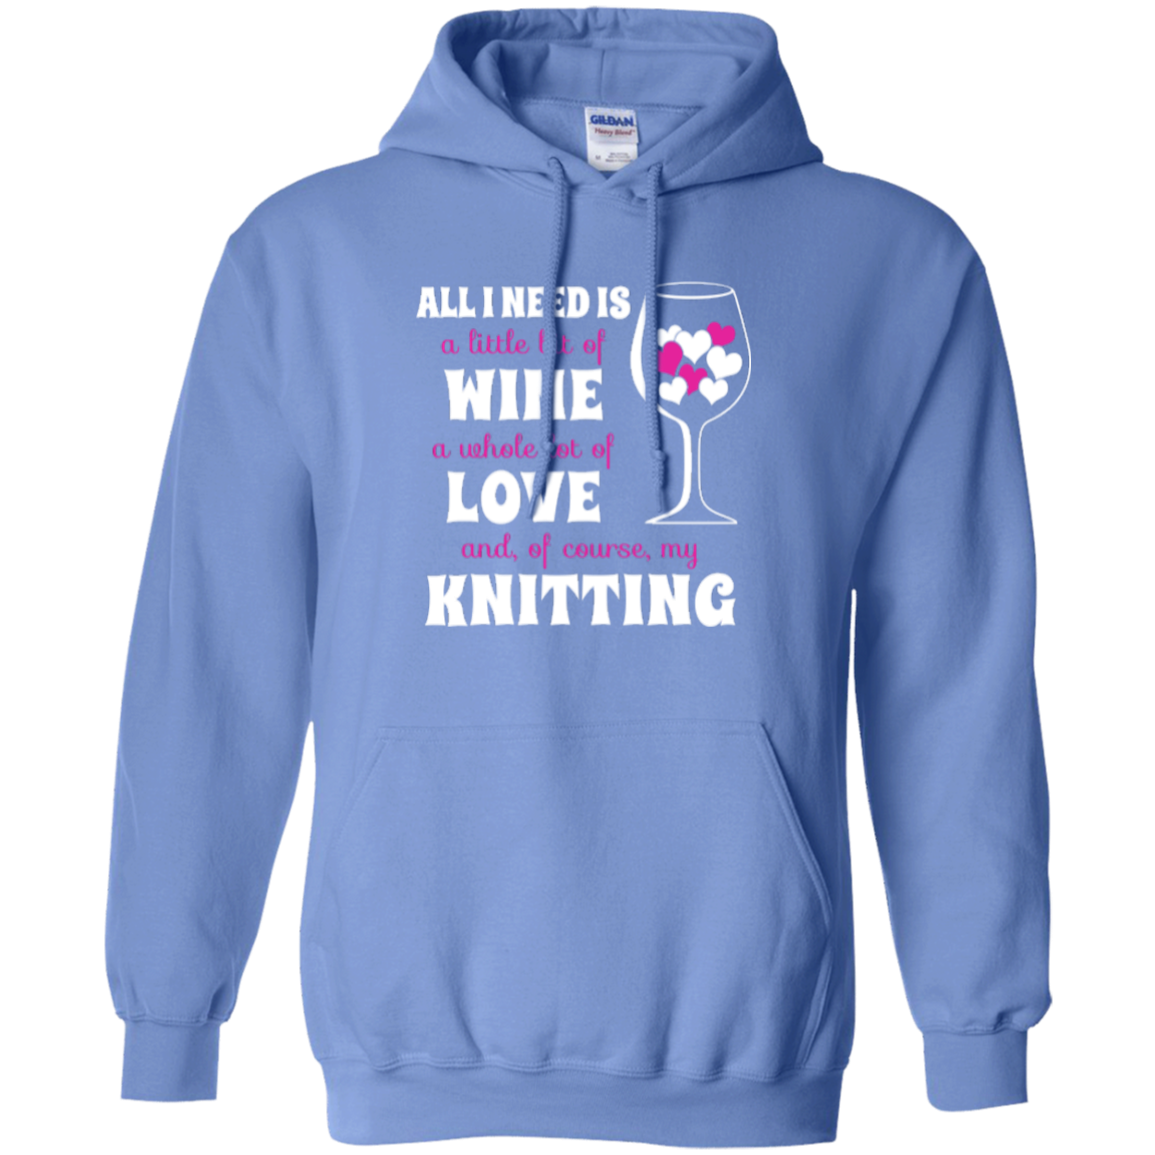 All I Need is Wine-Love-Knitting Pullover Hoodies - Crafter4Life - 5